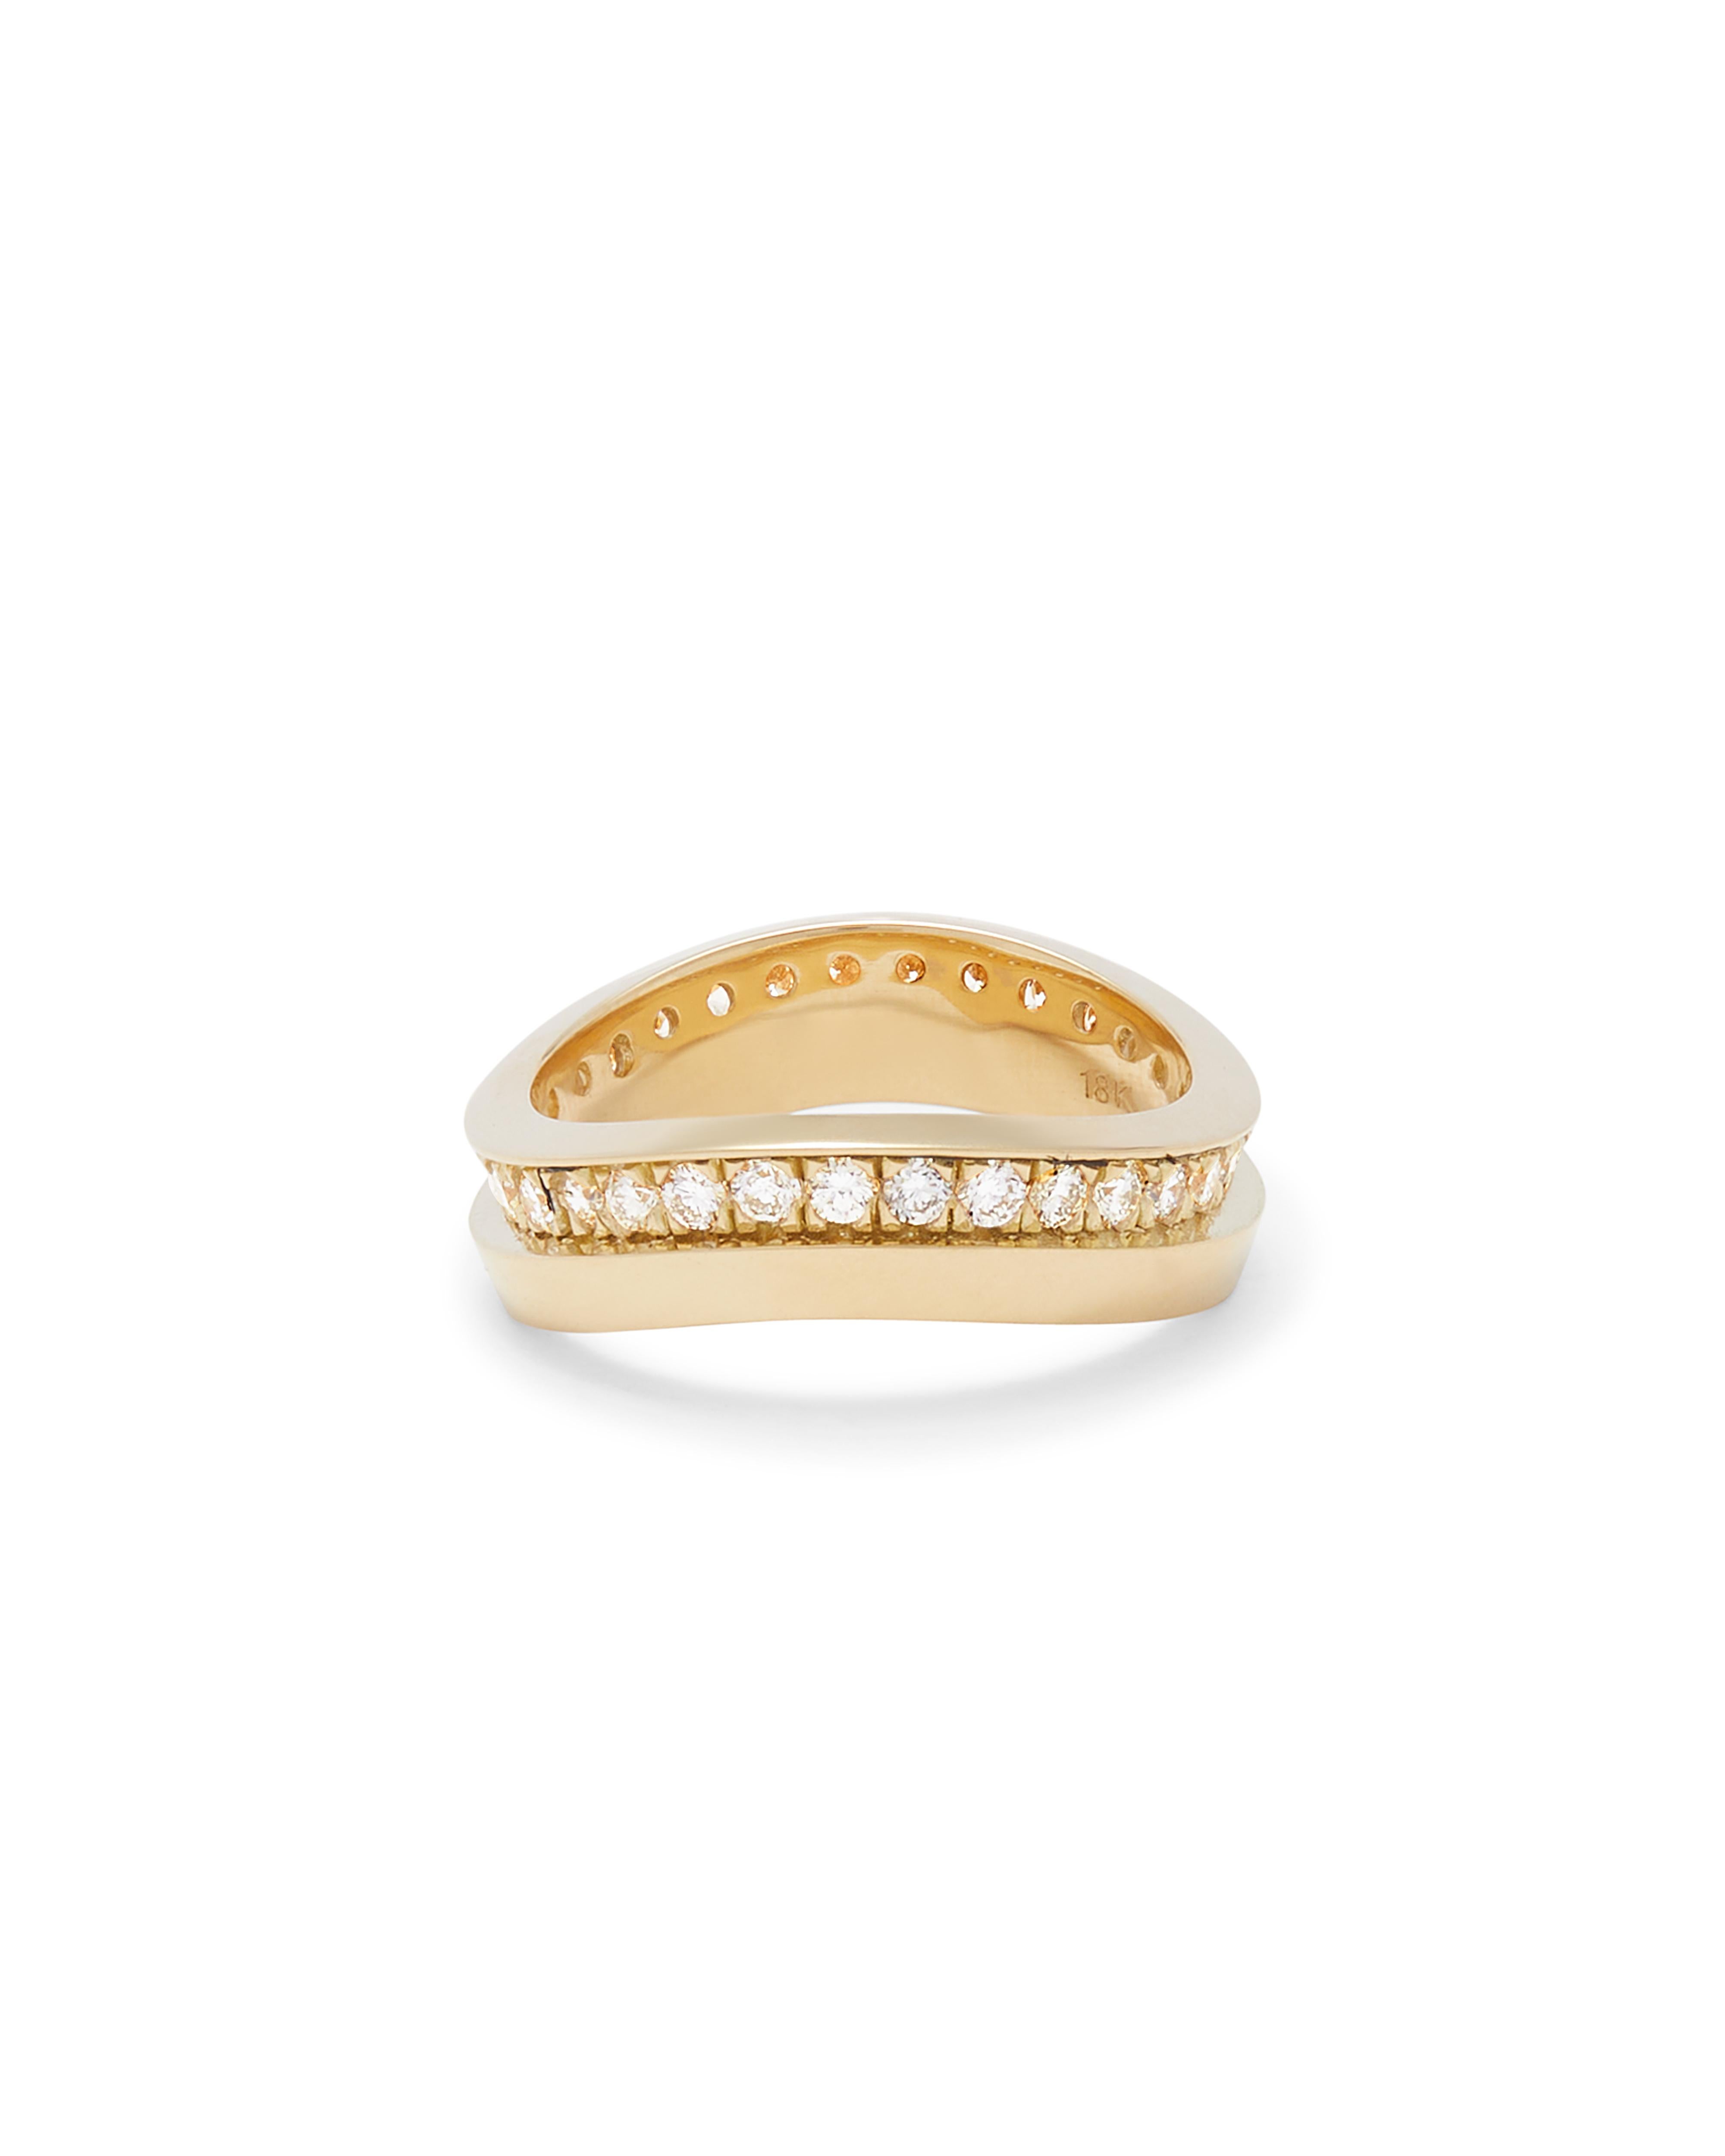 Contemporary Casey Perez Tiered 18K Gold and Diamond Wave Band Stackable Ring - sz 7 For Sale